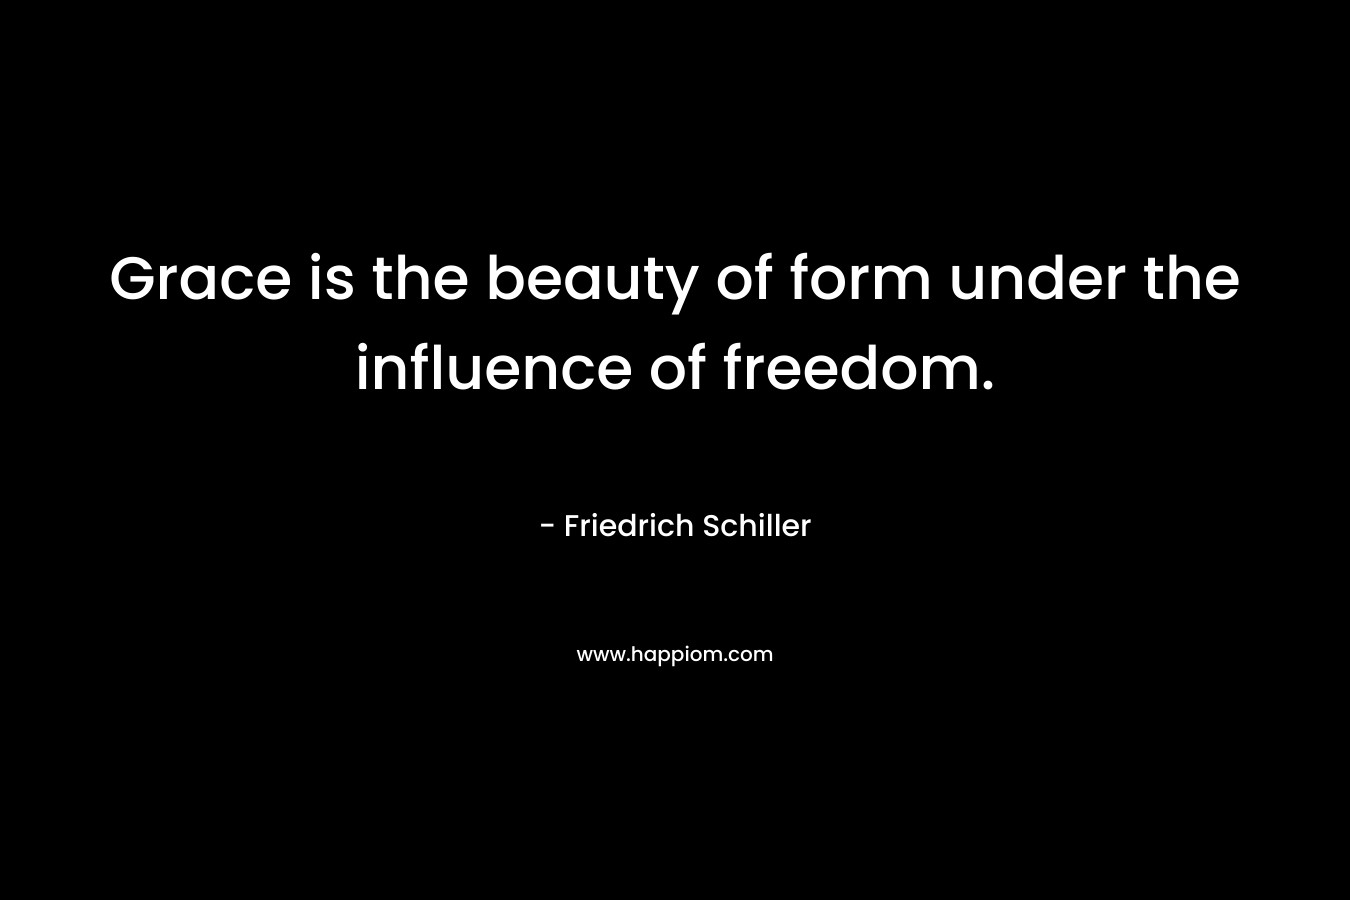 Grace is the beauty of form under the influence of freedom. – Friedrich Schiller